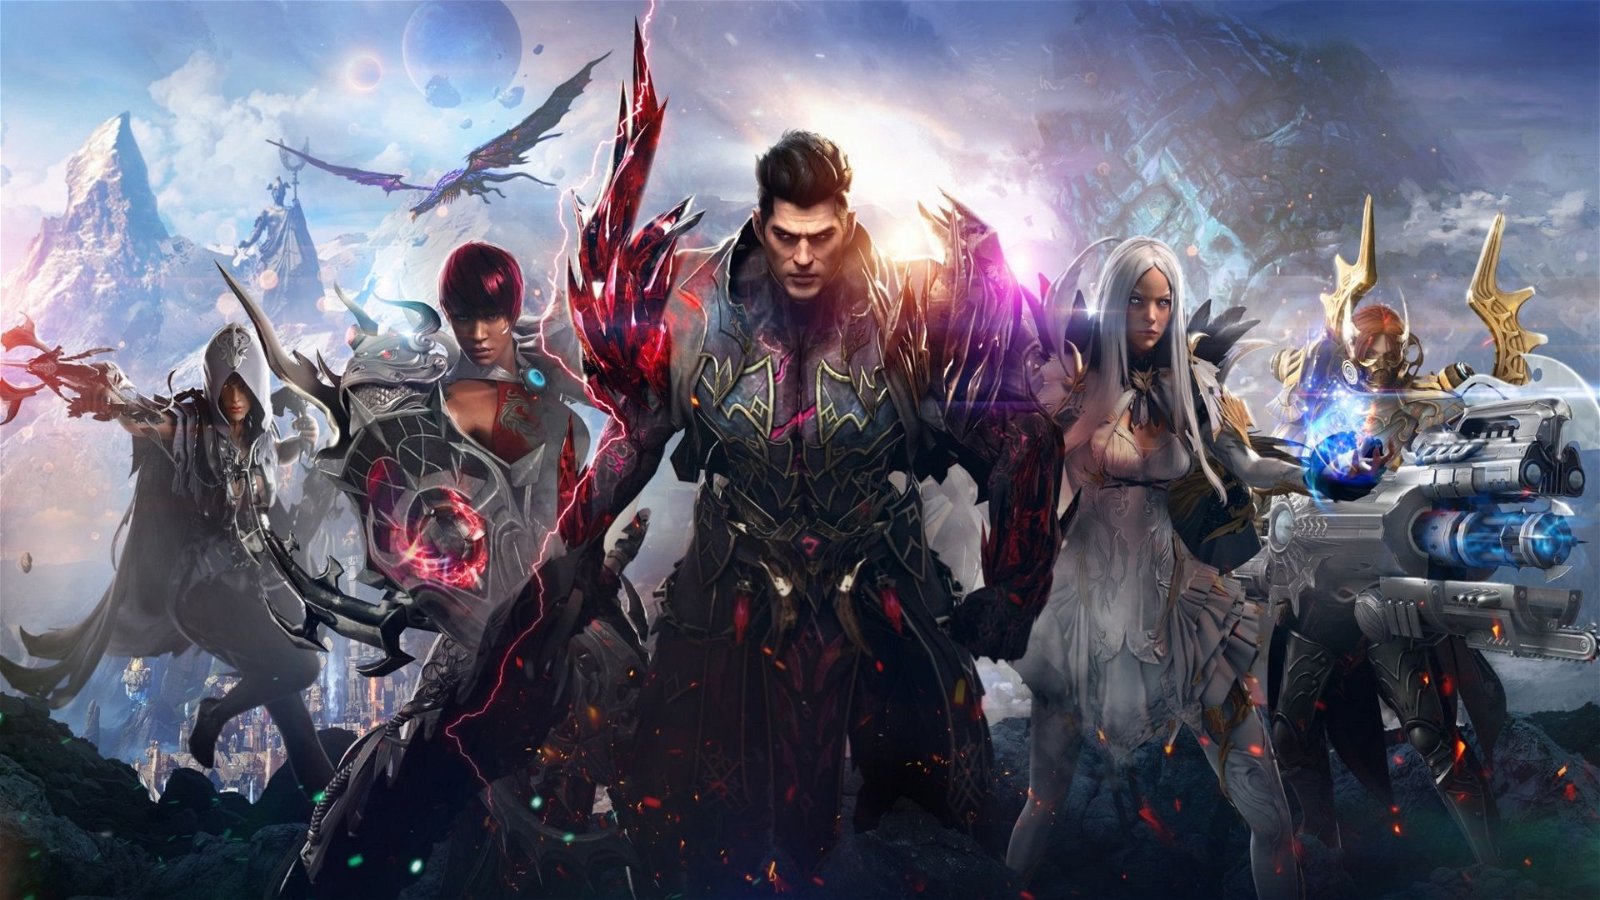 Lost Ark is getting a new European server region to cope with the influx of  players